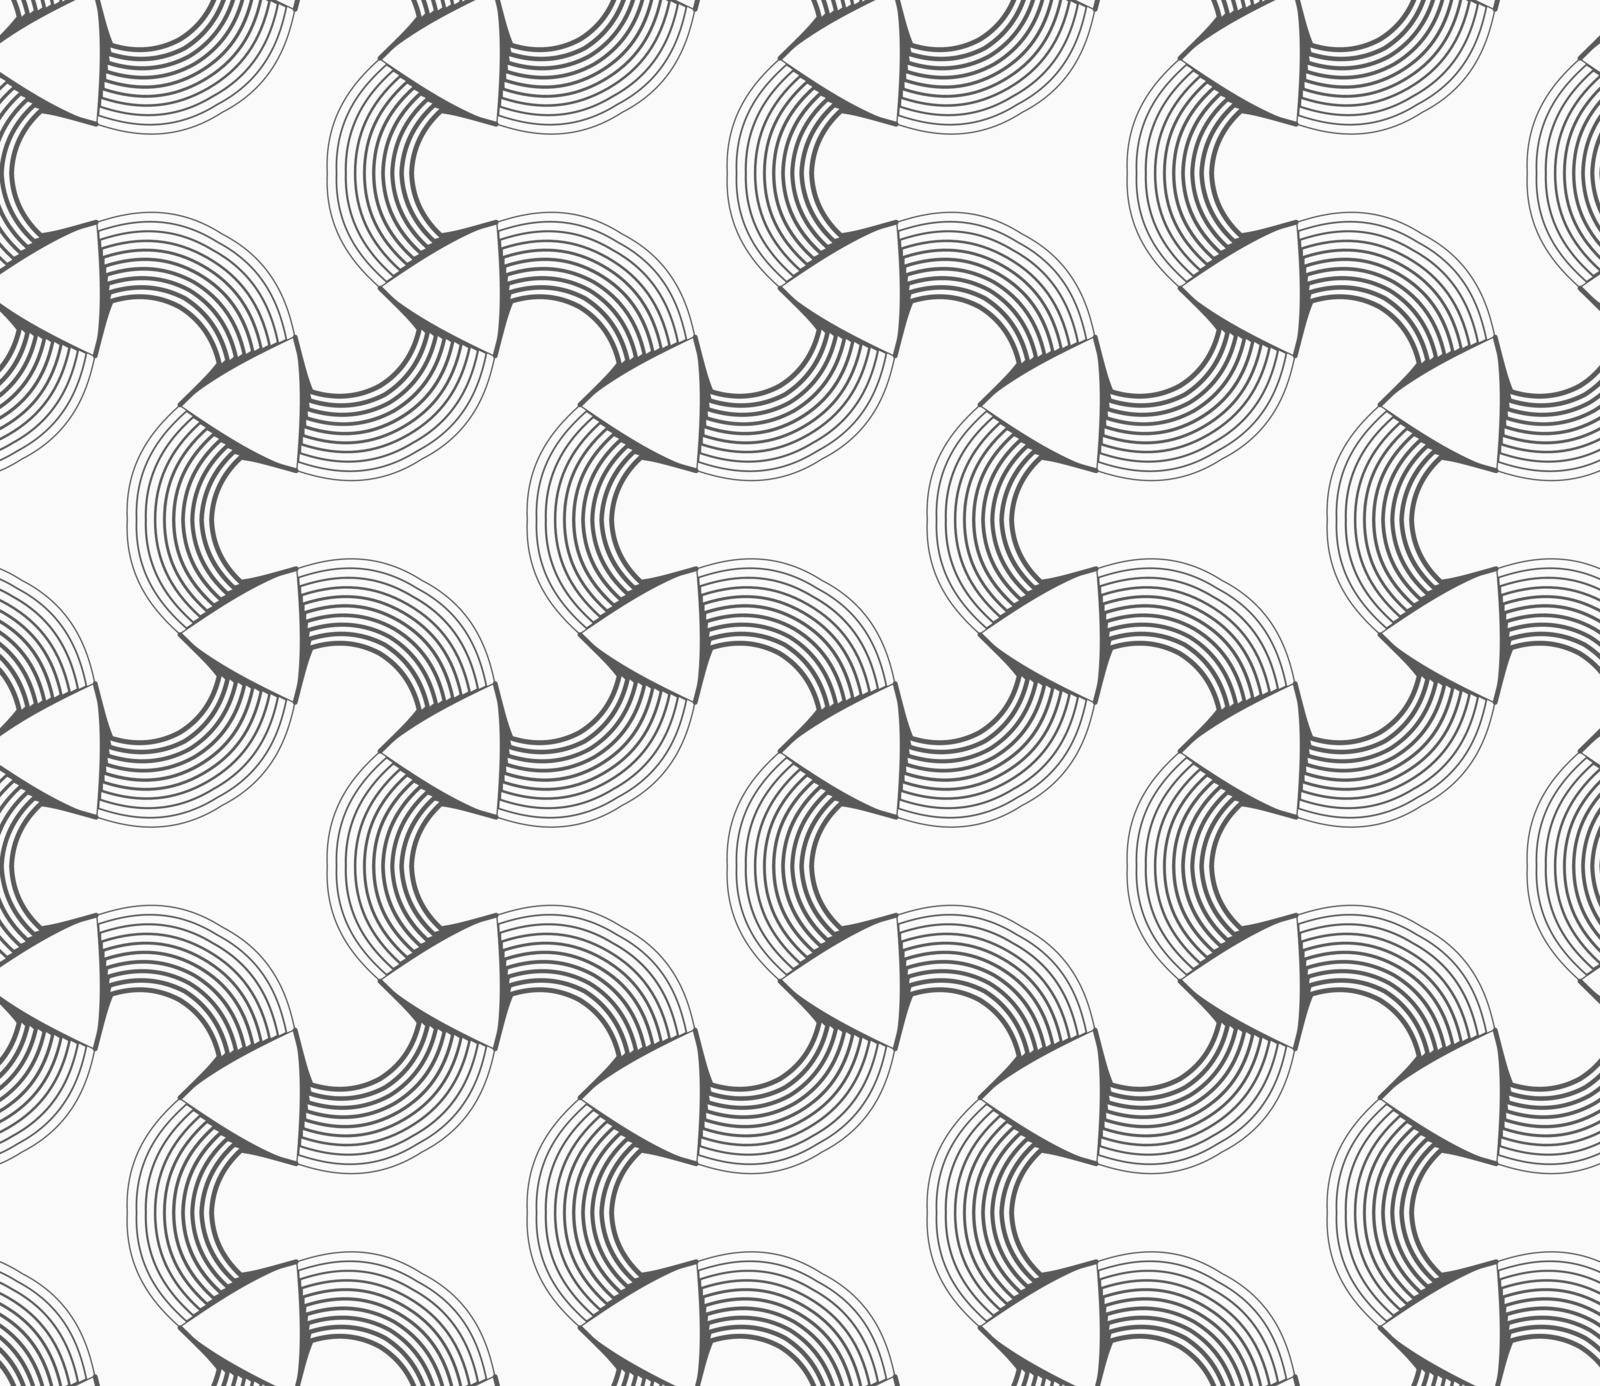 Seamless geometric pattern. Gray abstract geometrical design. Flat monochrome design.Monochrome white tetrapods with striped rounded corners.